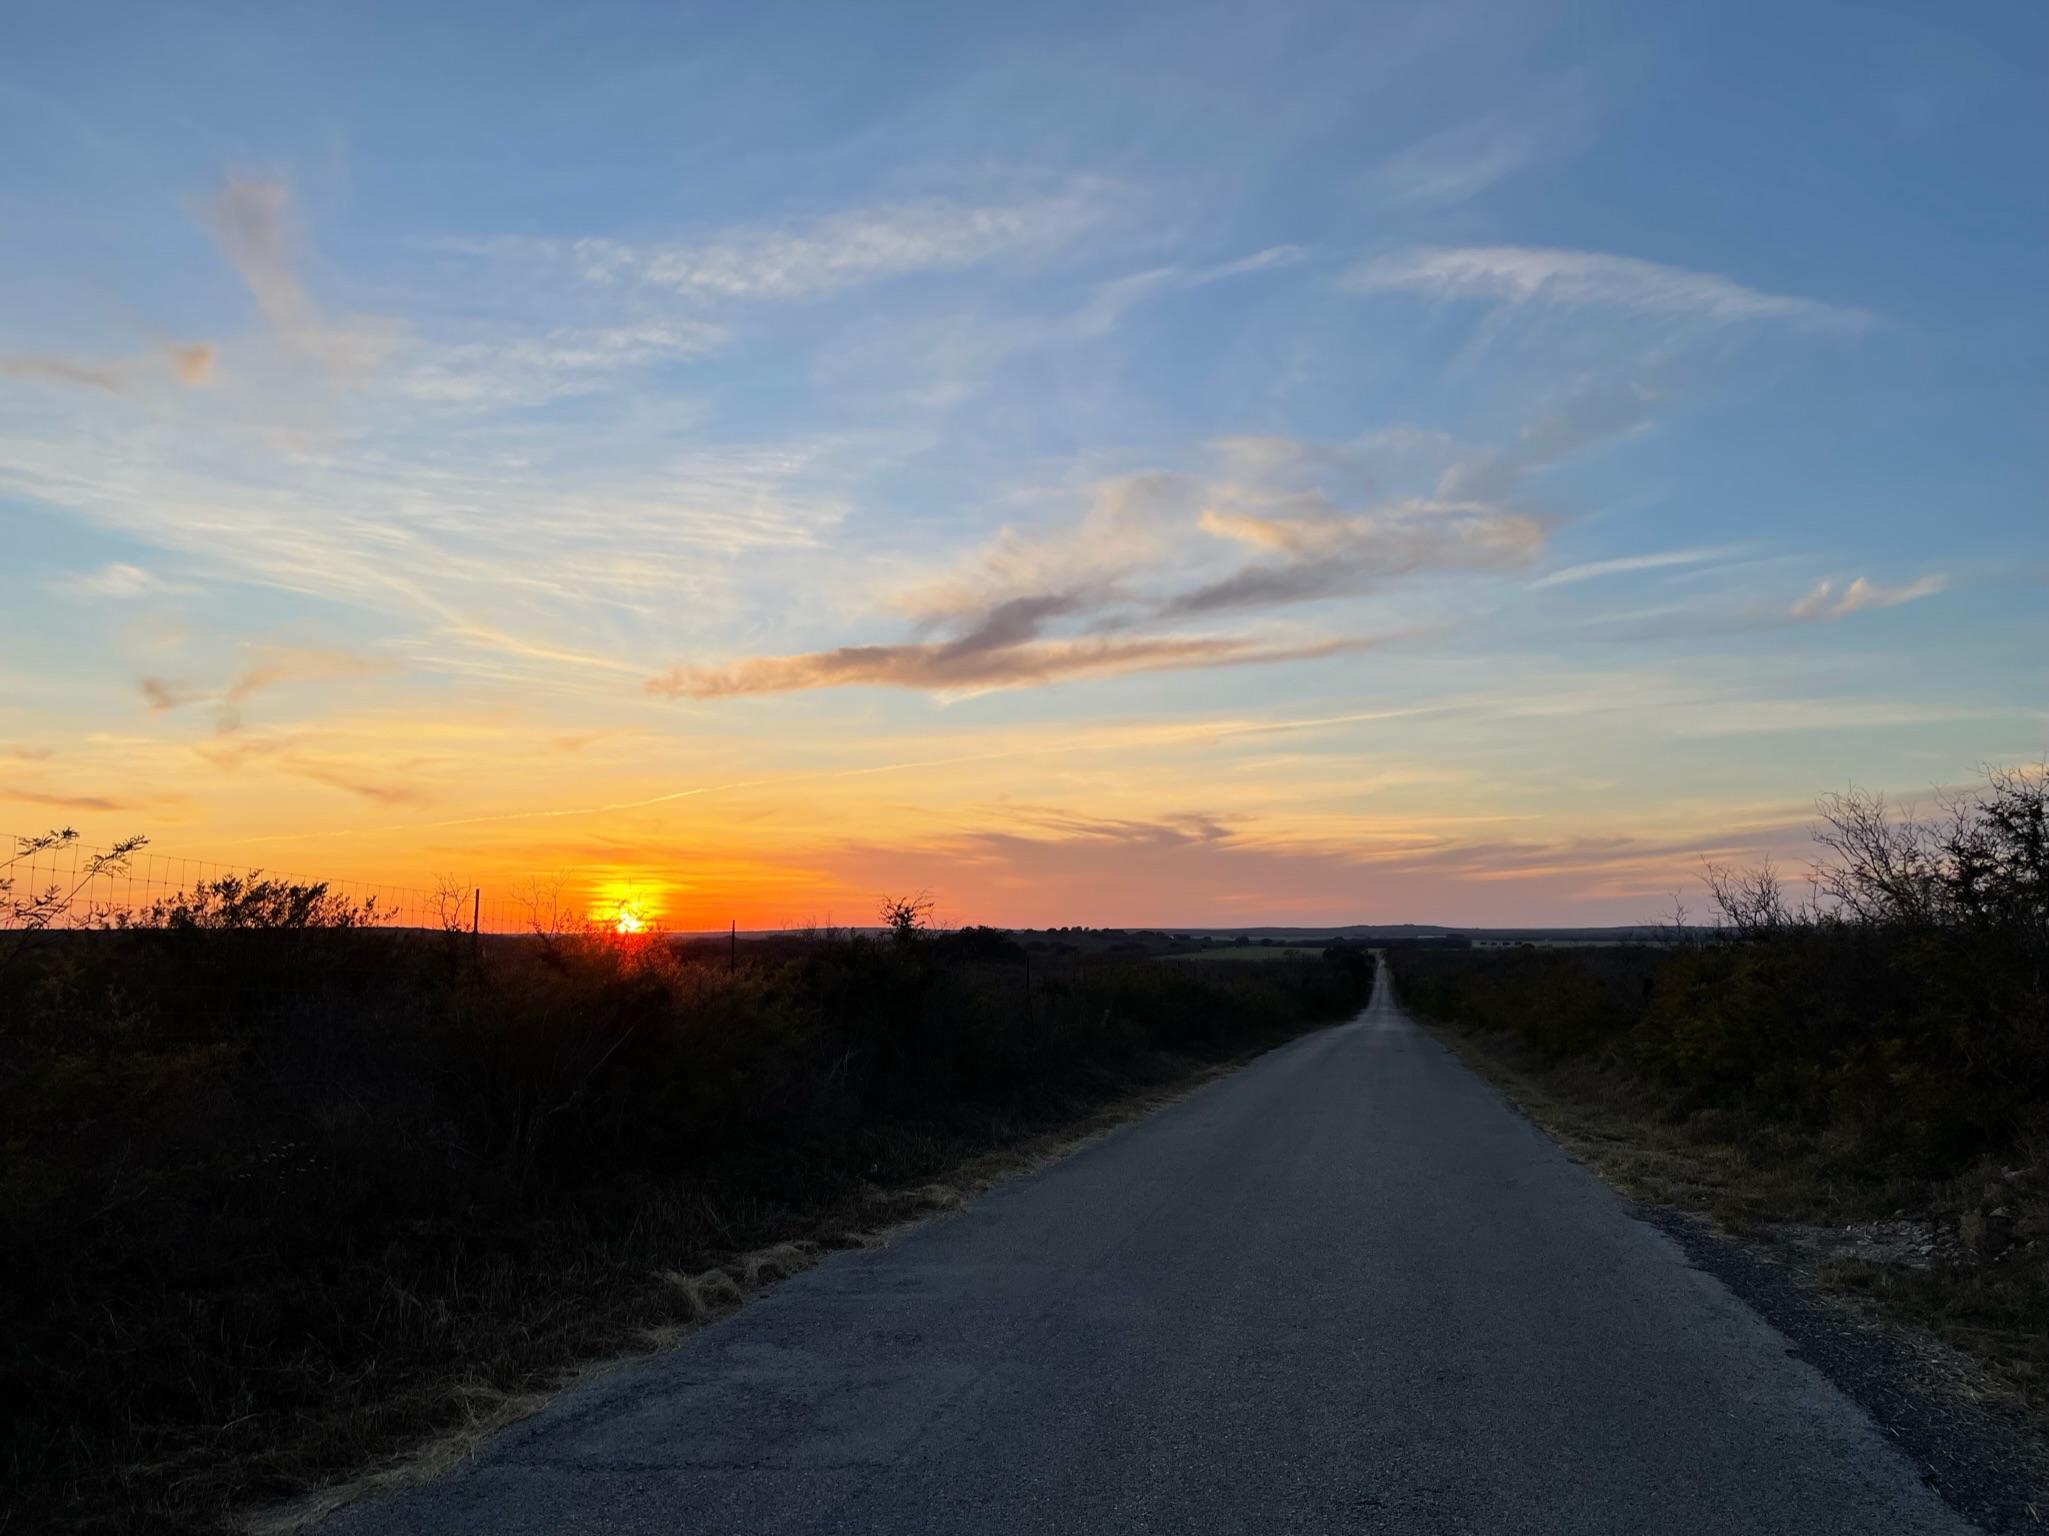 Rural county road at sunset.